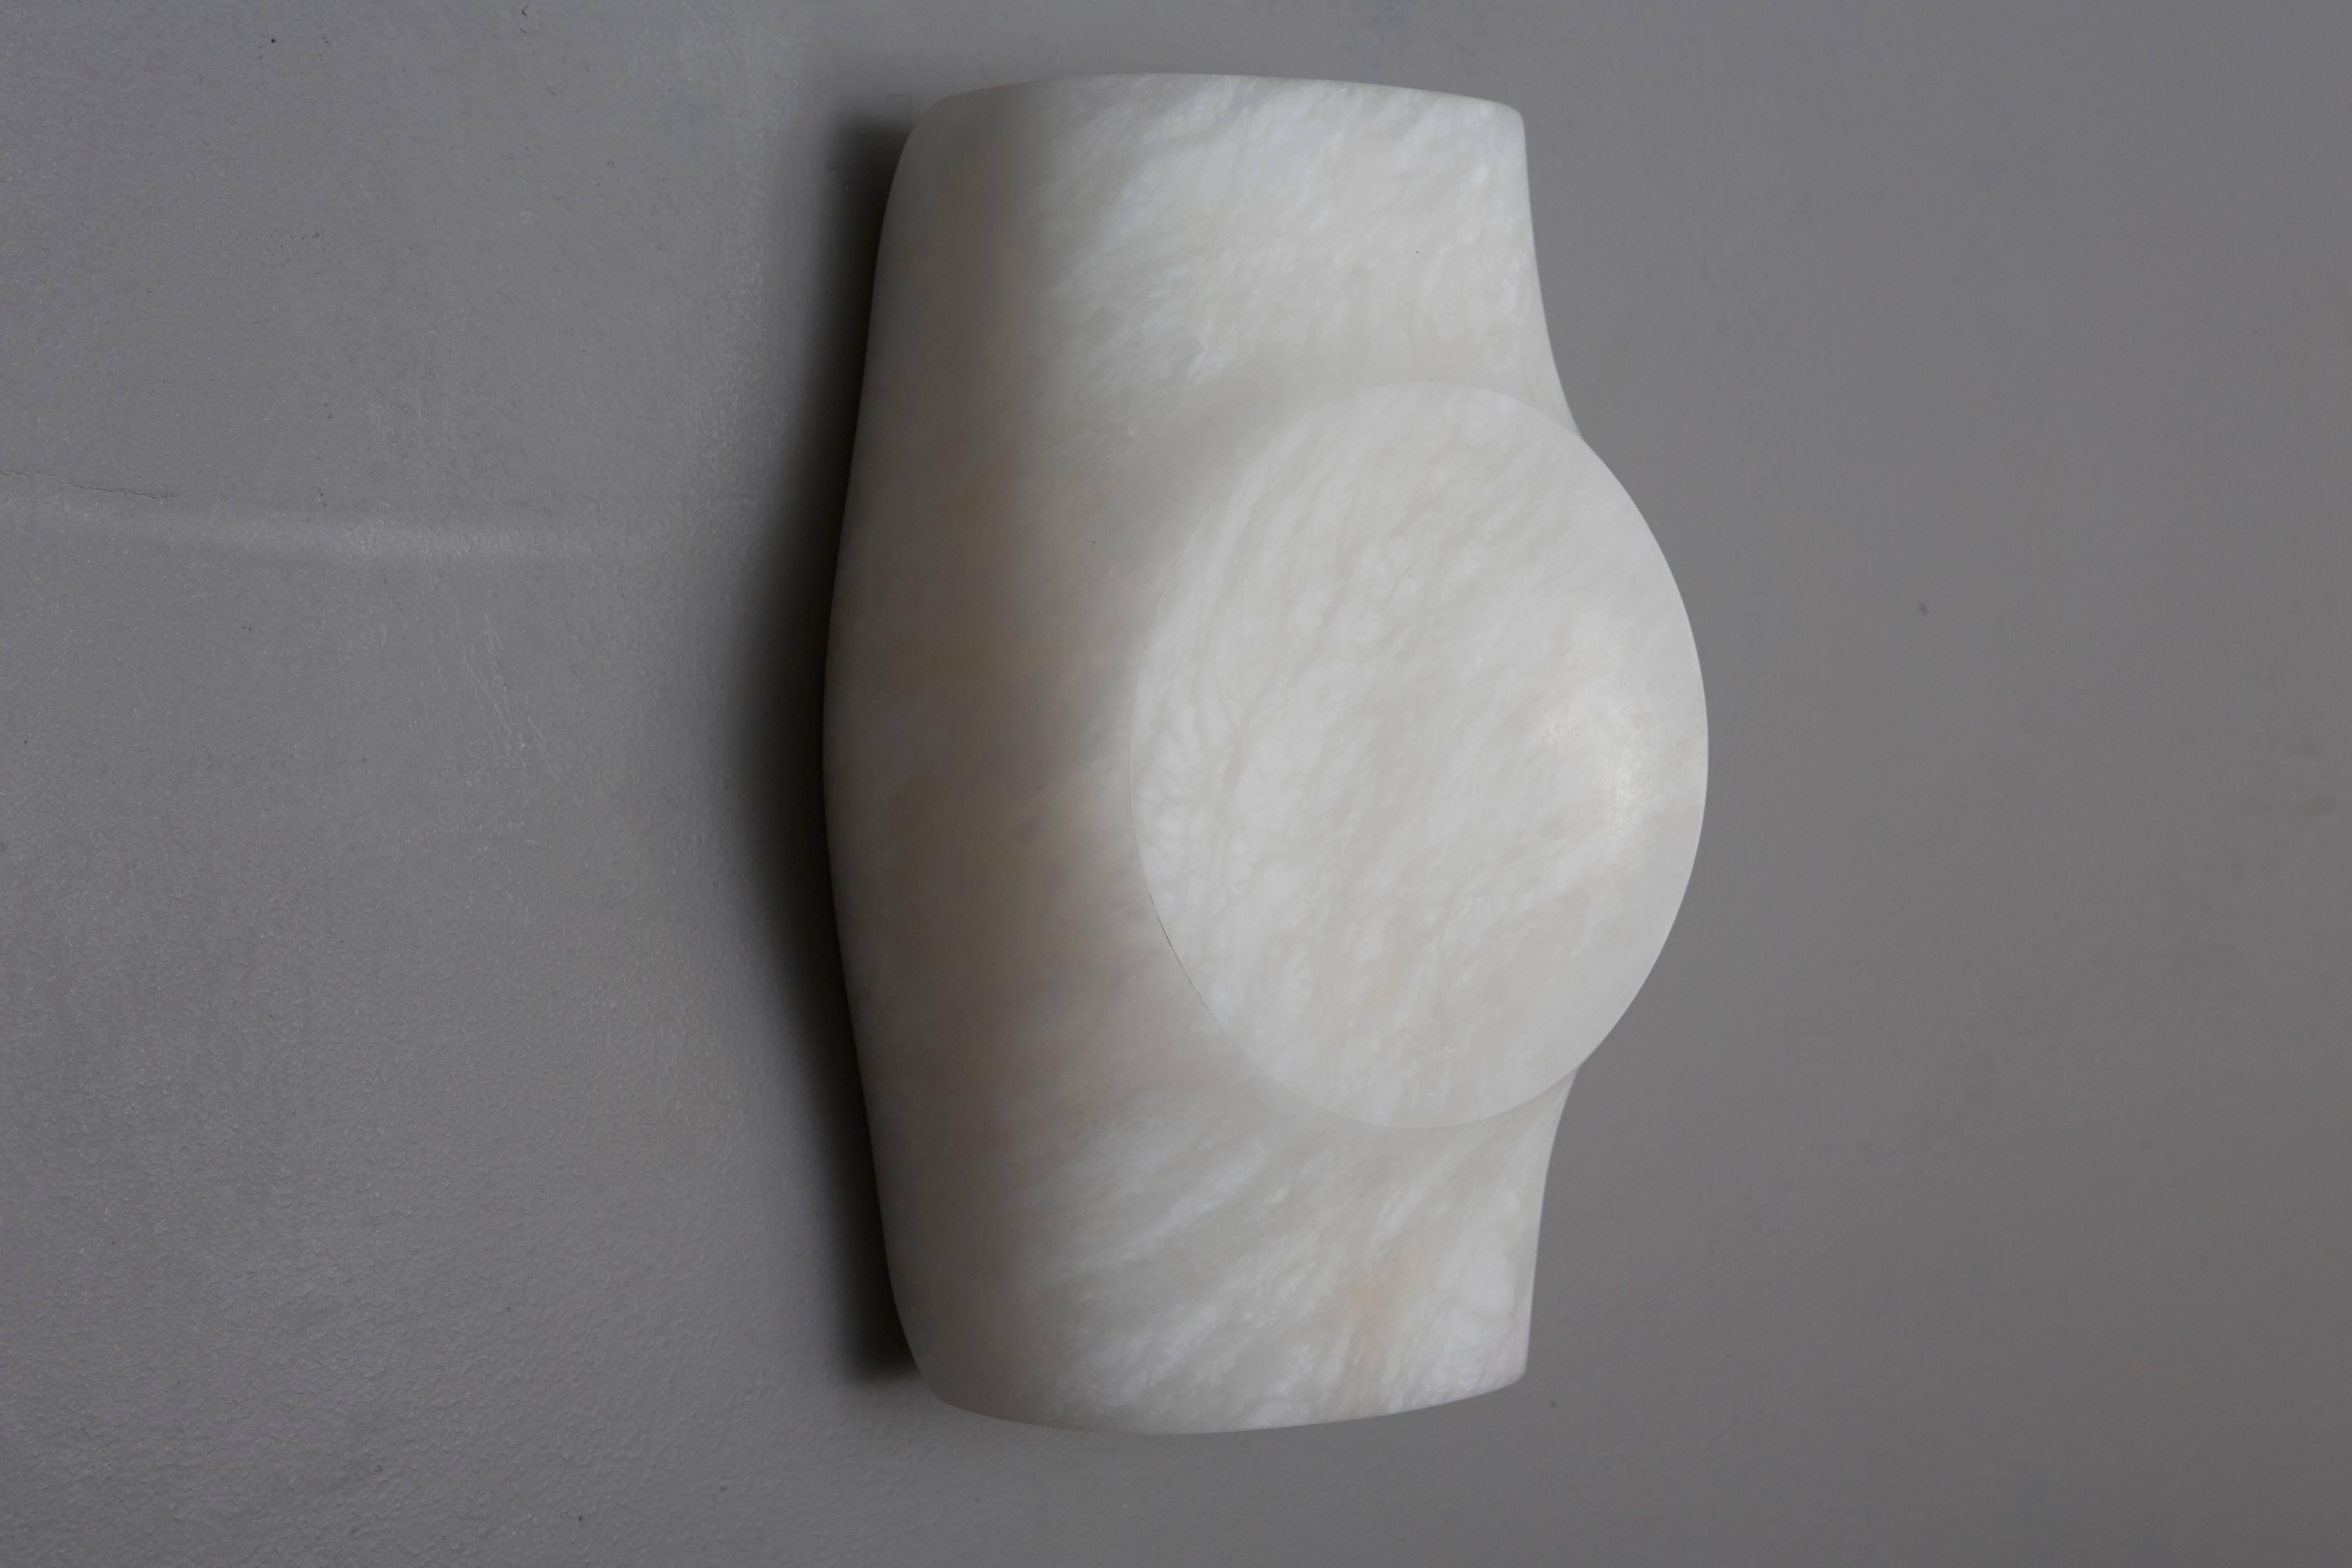 A sconce in softened alabaster, with up and down lighting.
French work by designer Emmanuel Levet Stenne, 2017.